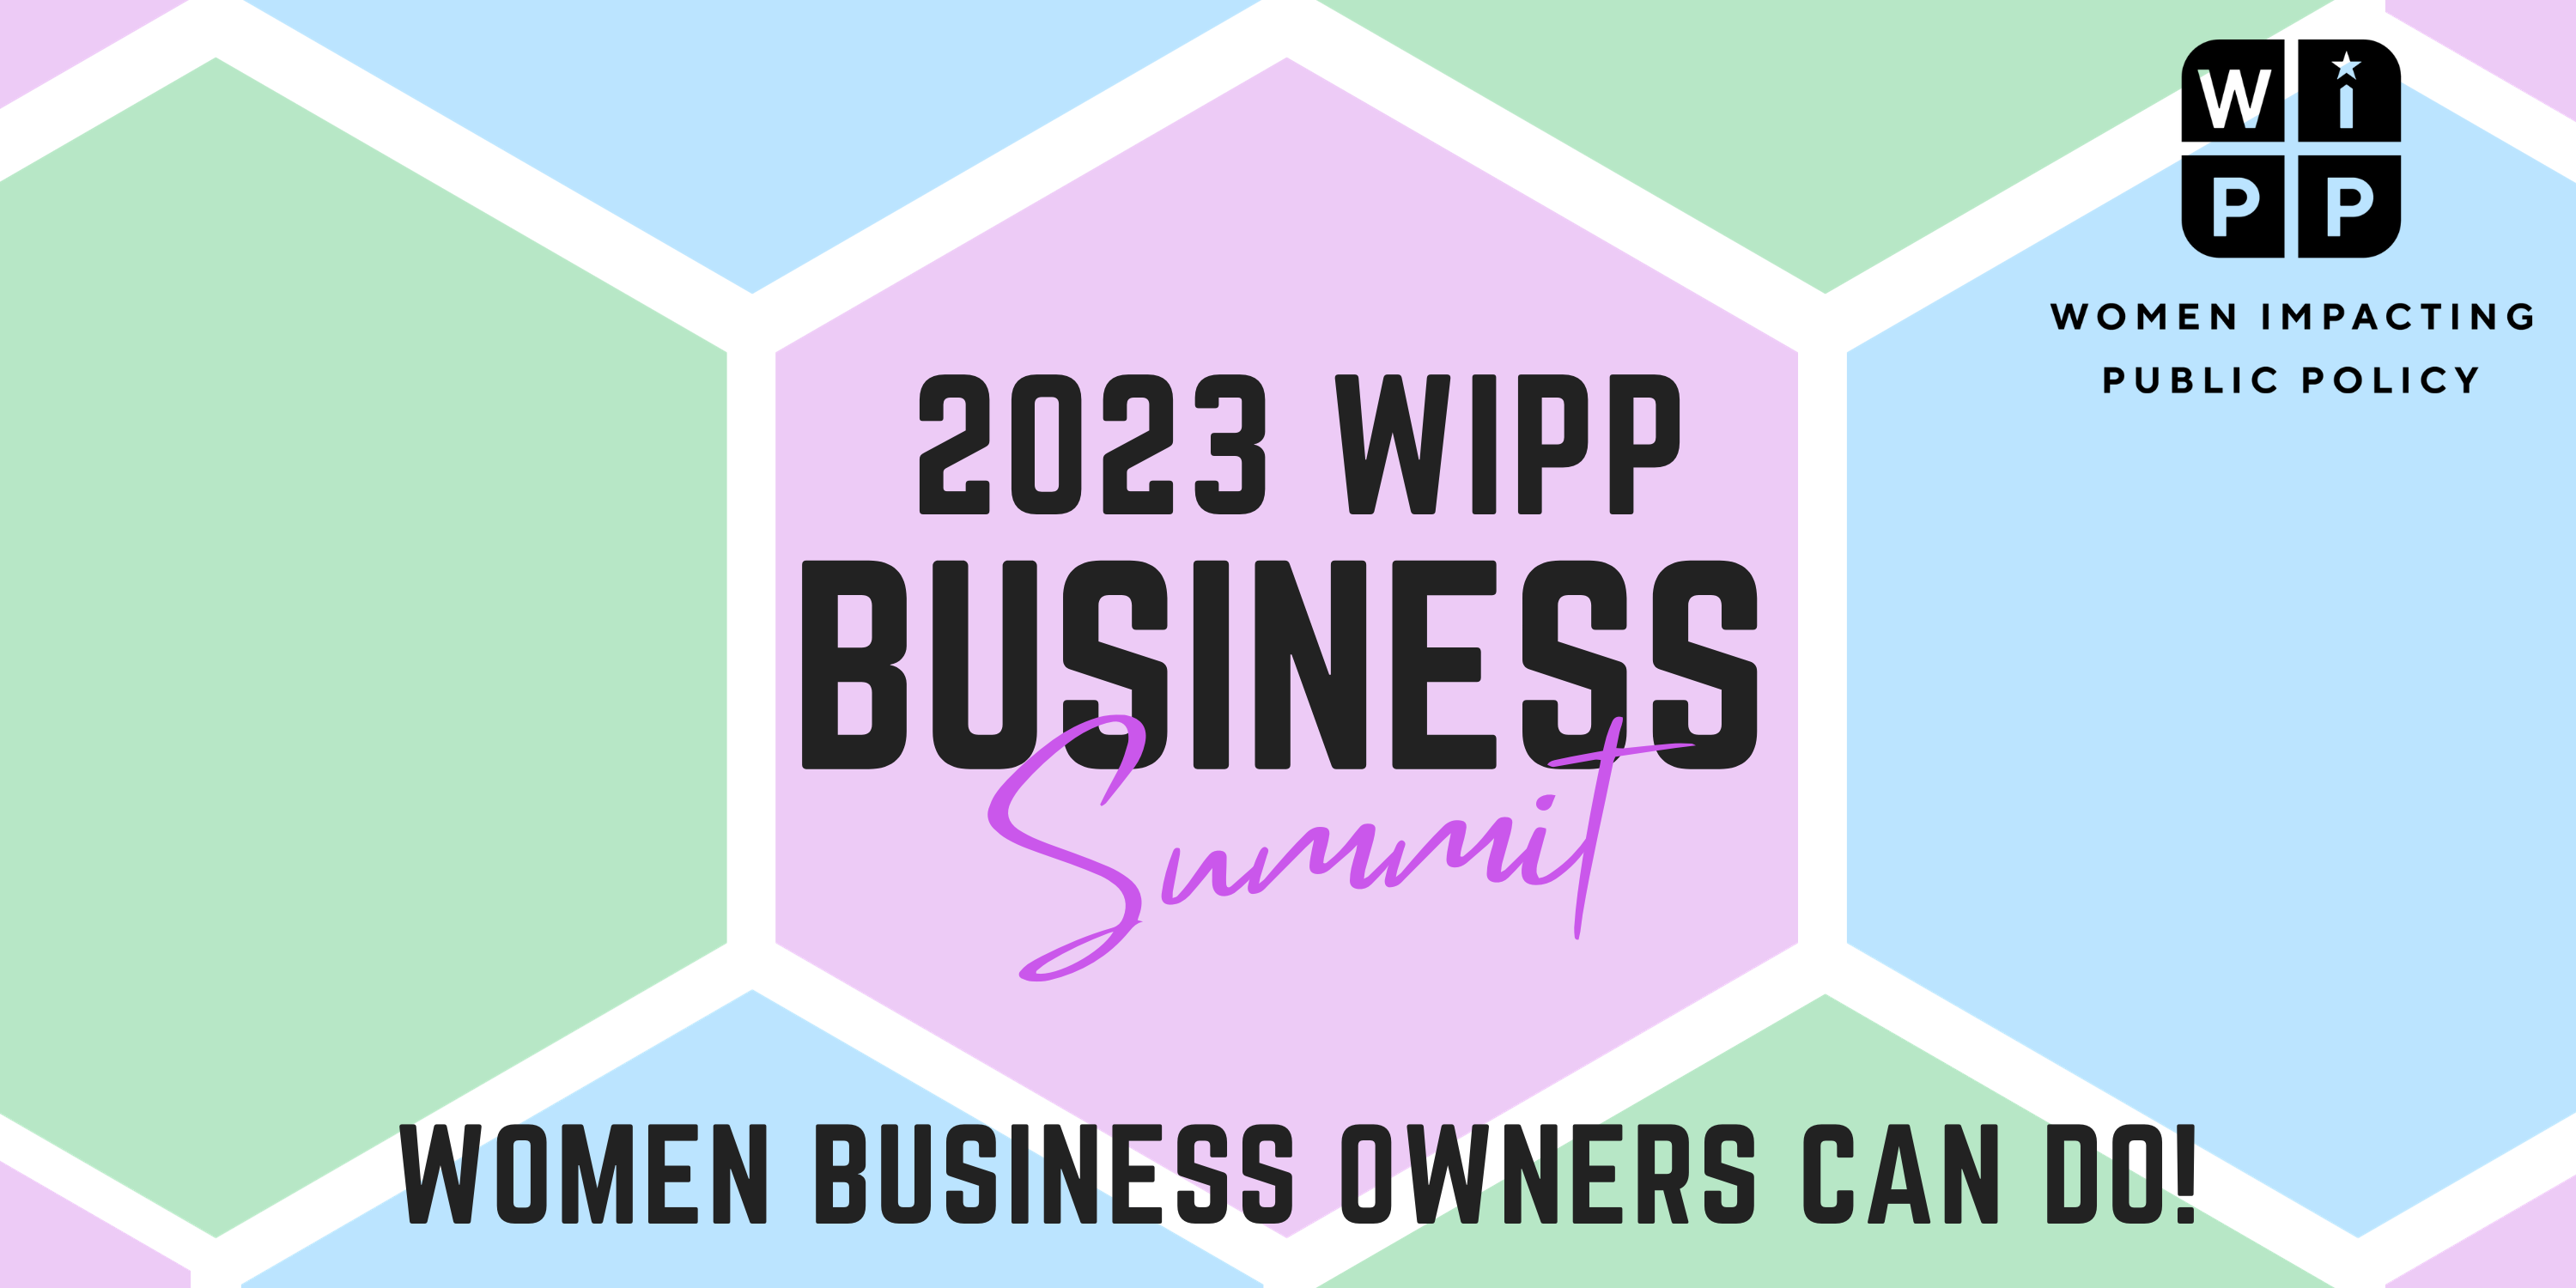 2023 WIPP Business Summit - Women business owners can do!